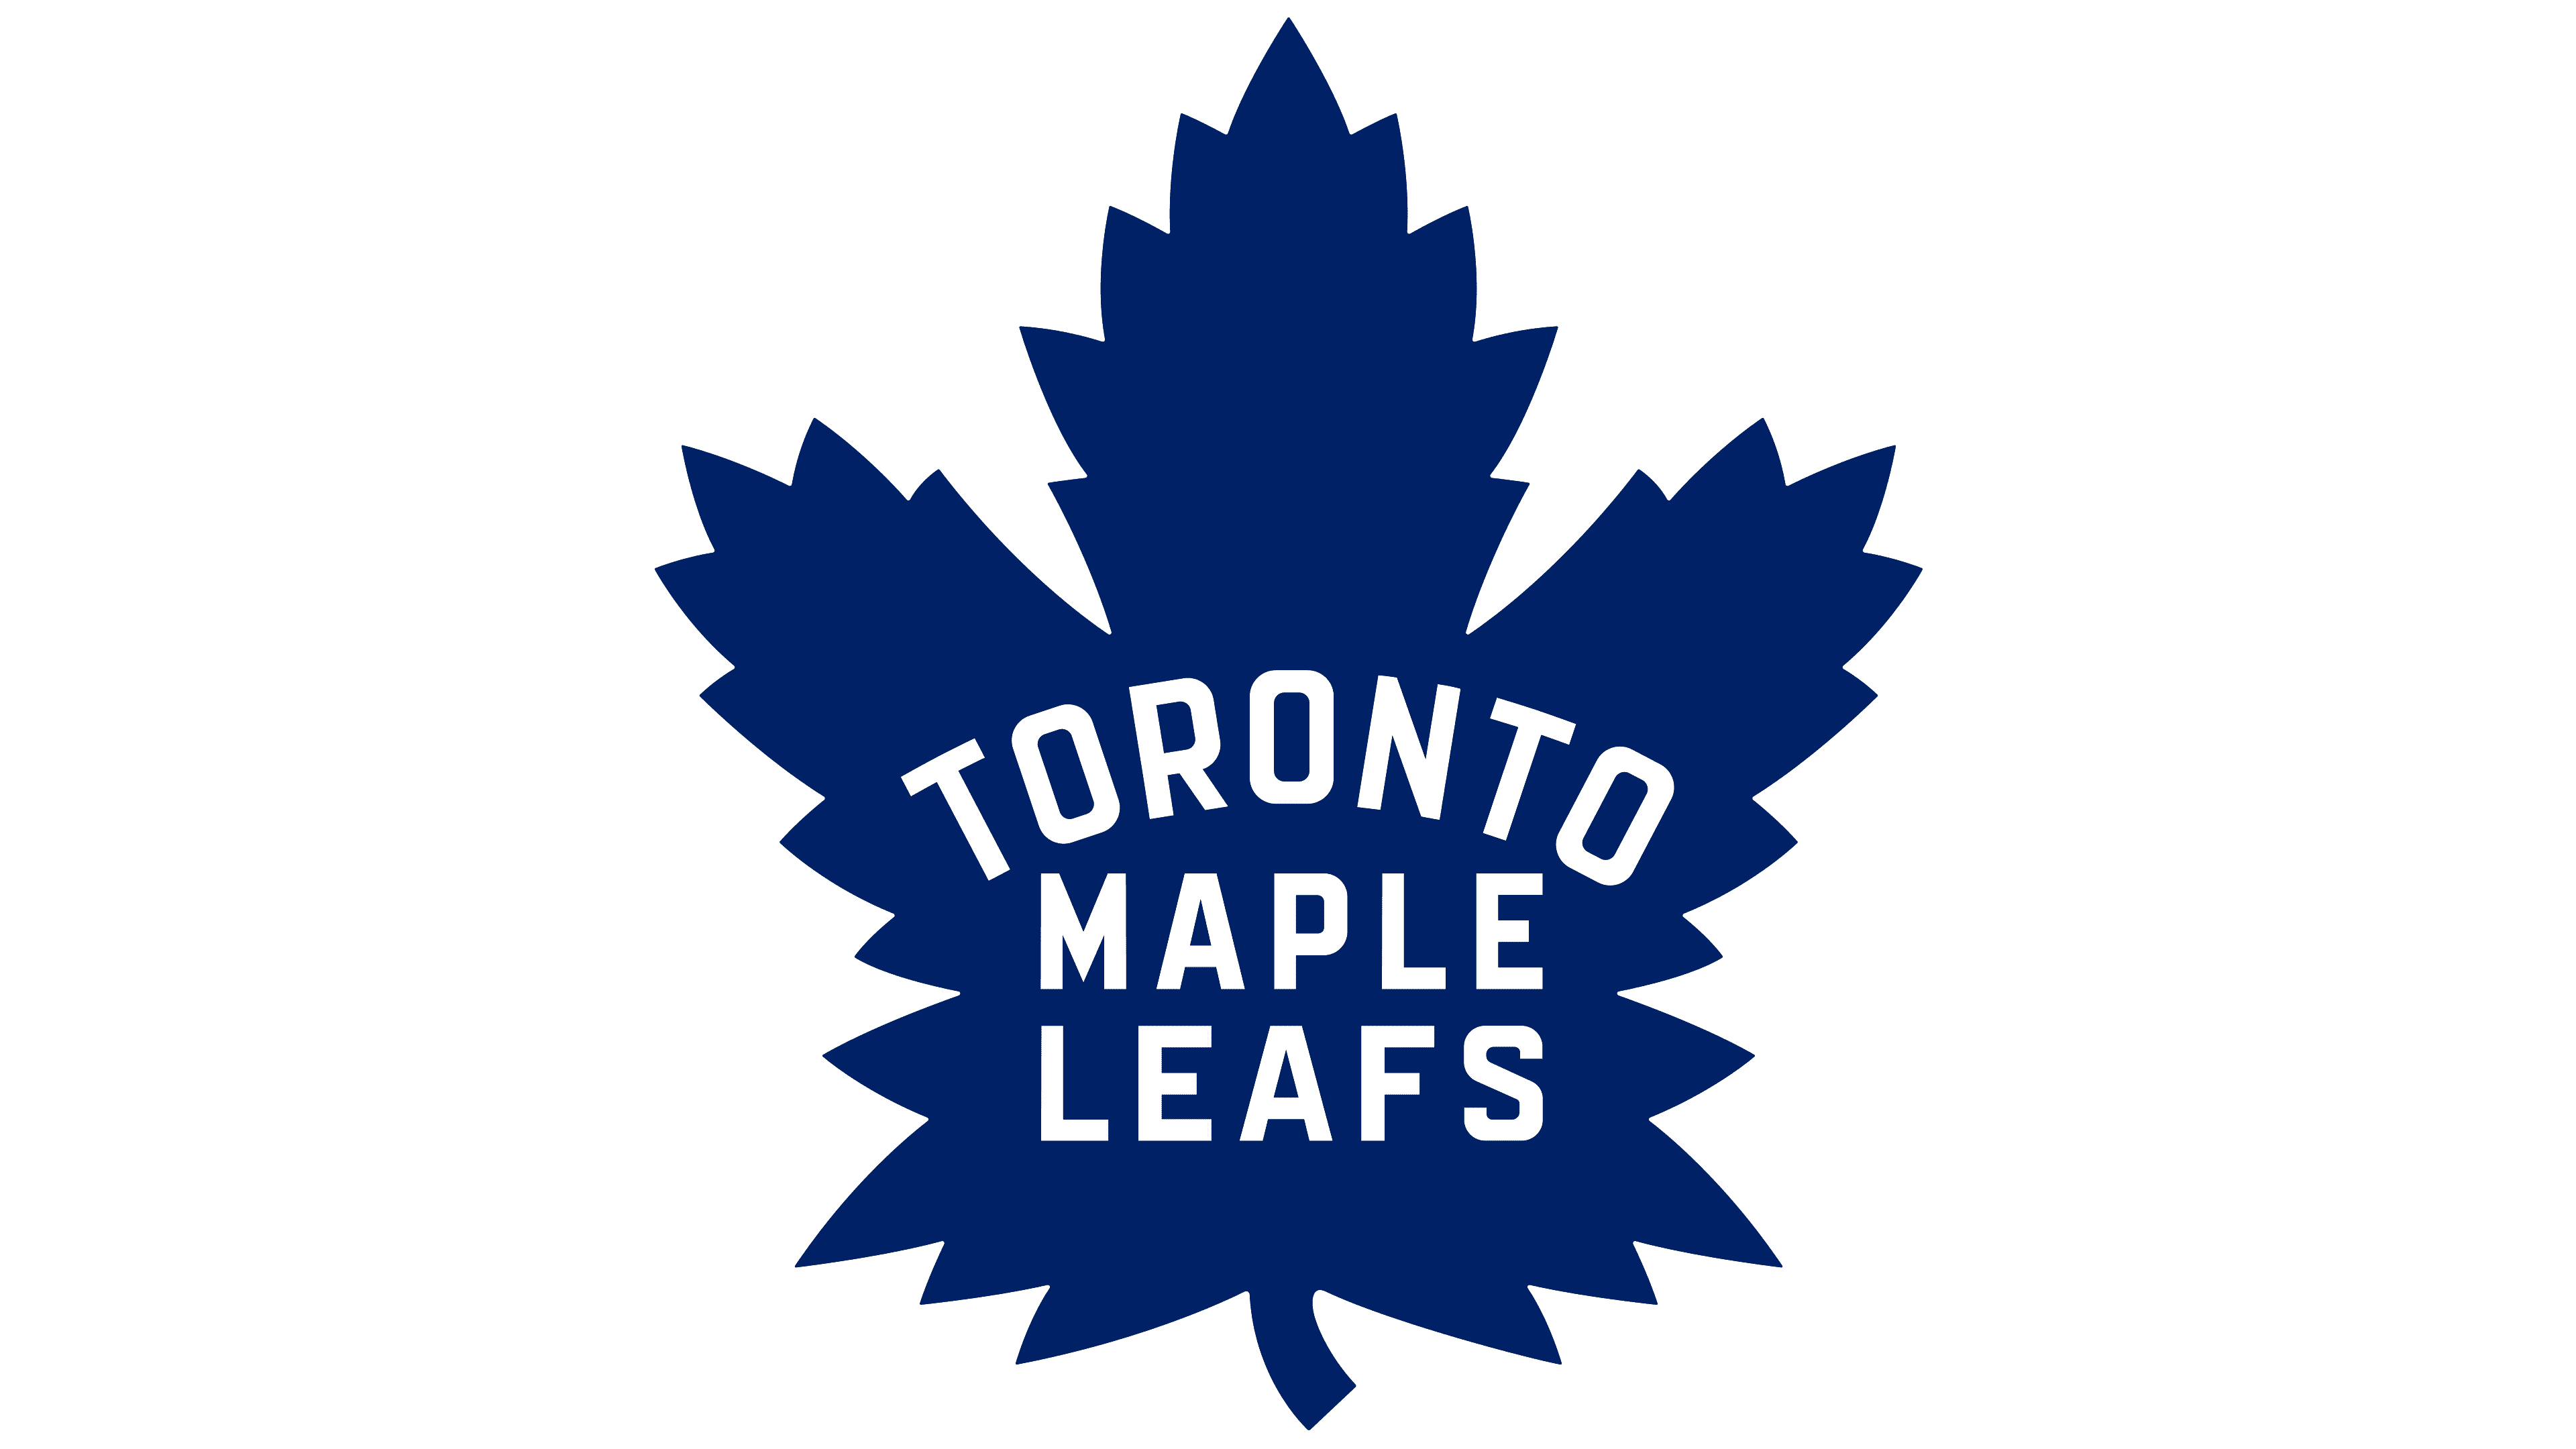 Toronto Maple Leafs Logo, symbol, meaning, history, PNG, brand